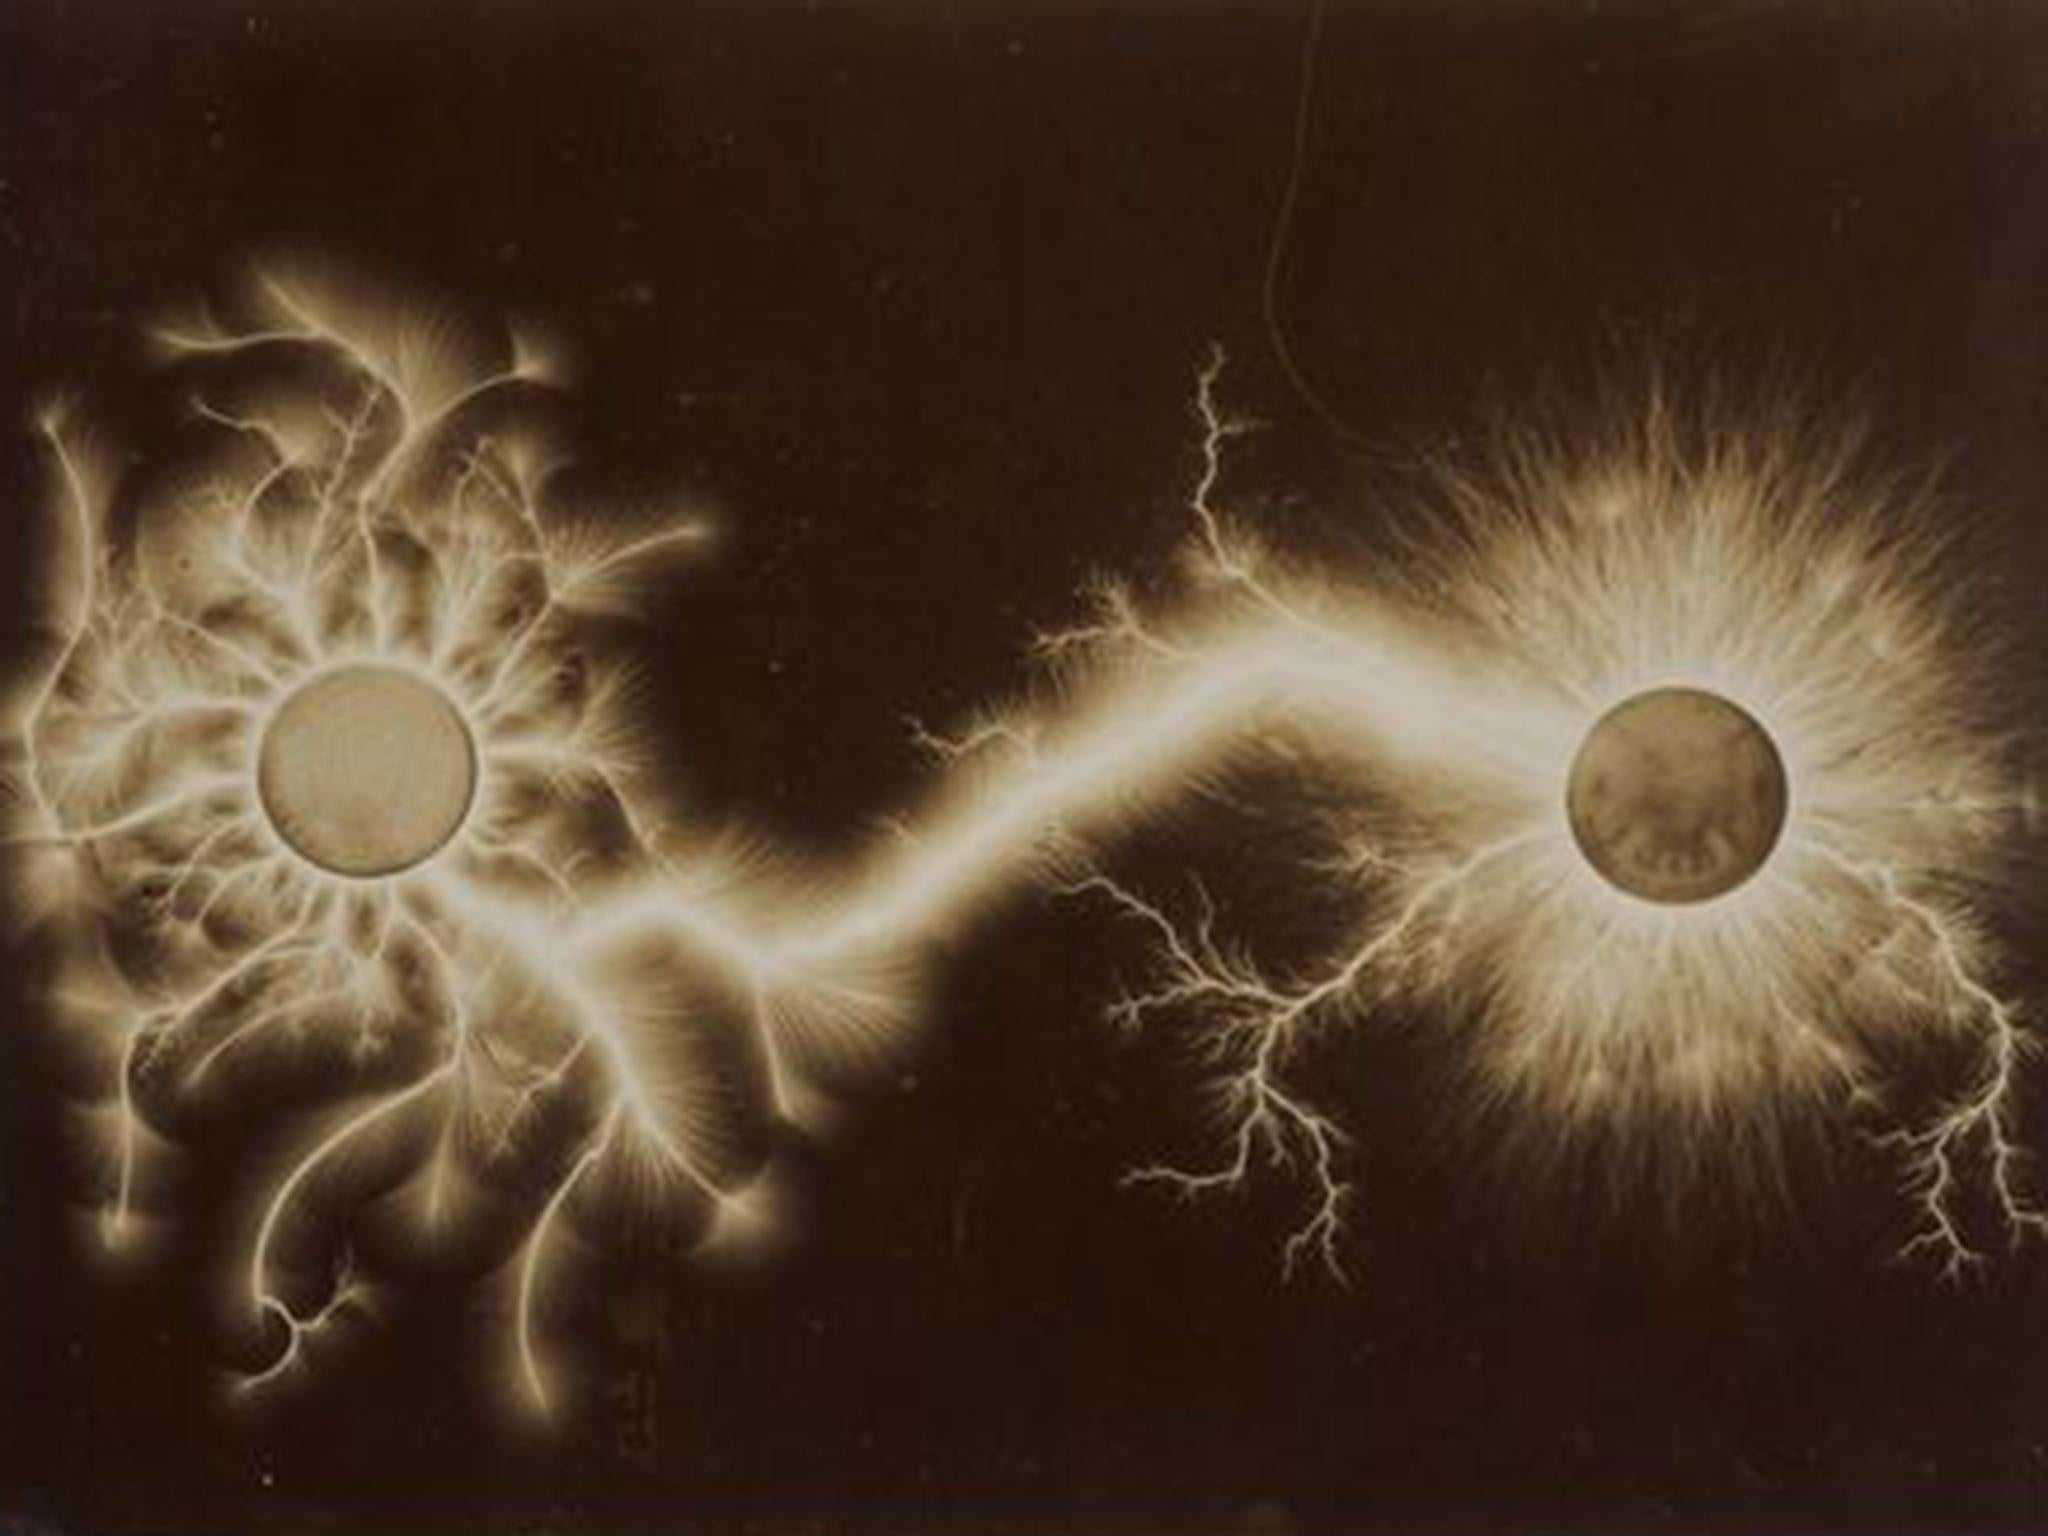 Étienne Léopold Trouvelot, Trouvelot figure. Photograph of electrical effluvia around a coin 1888–89